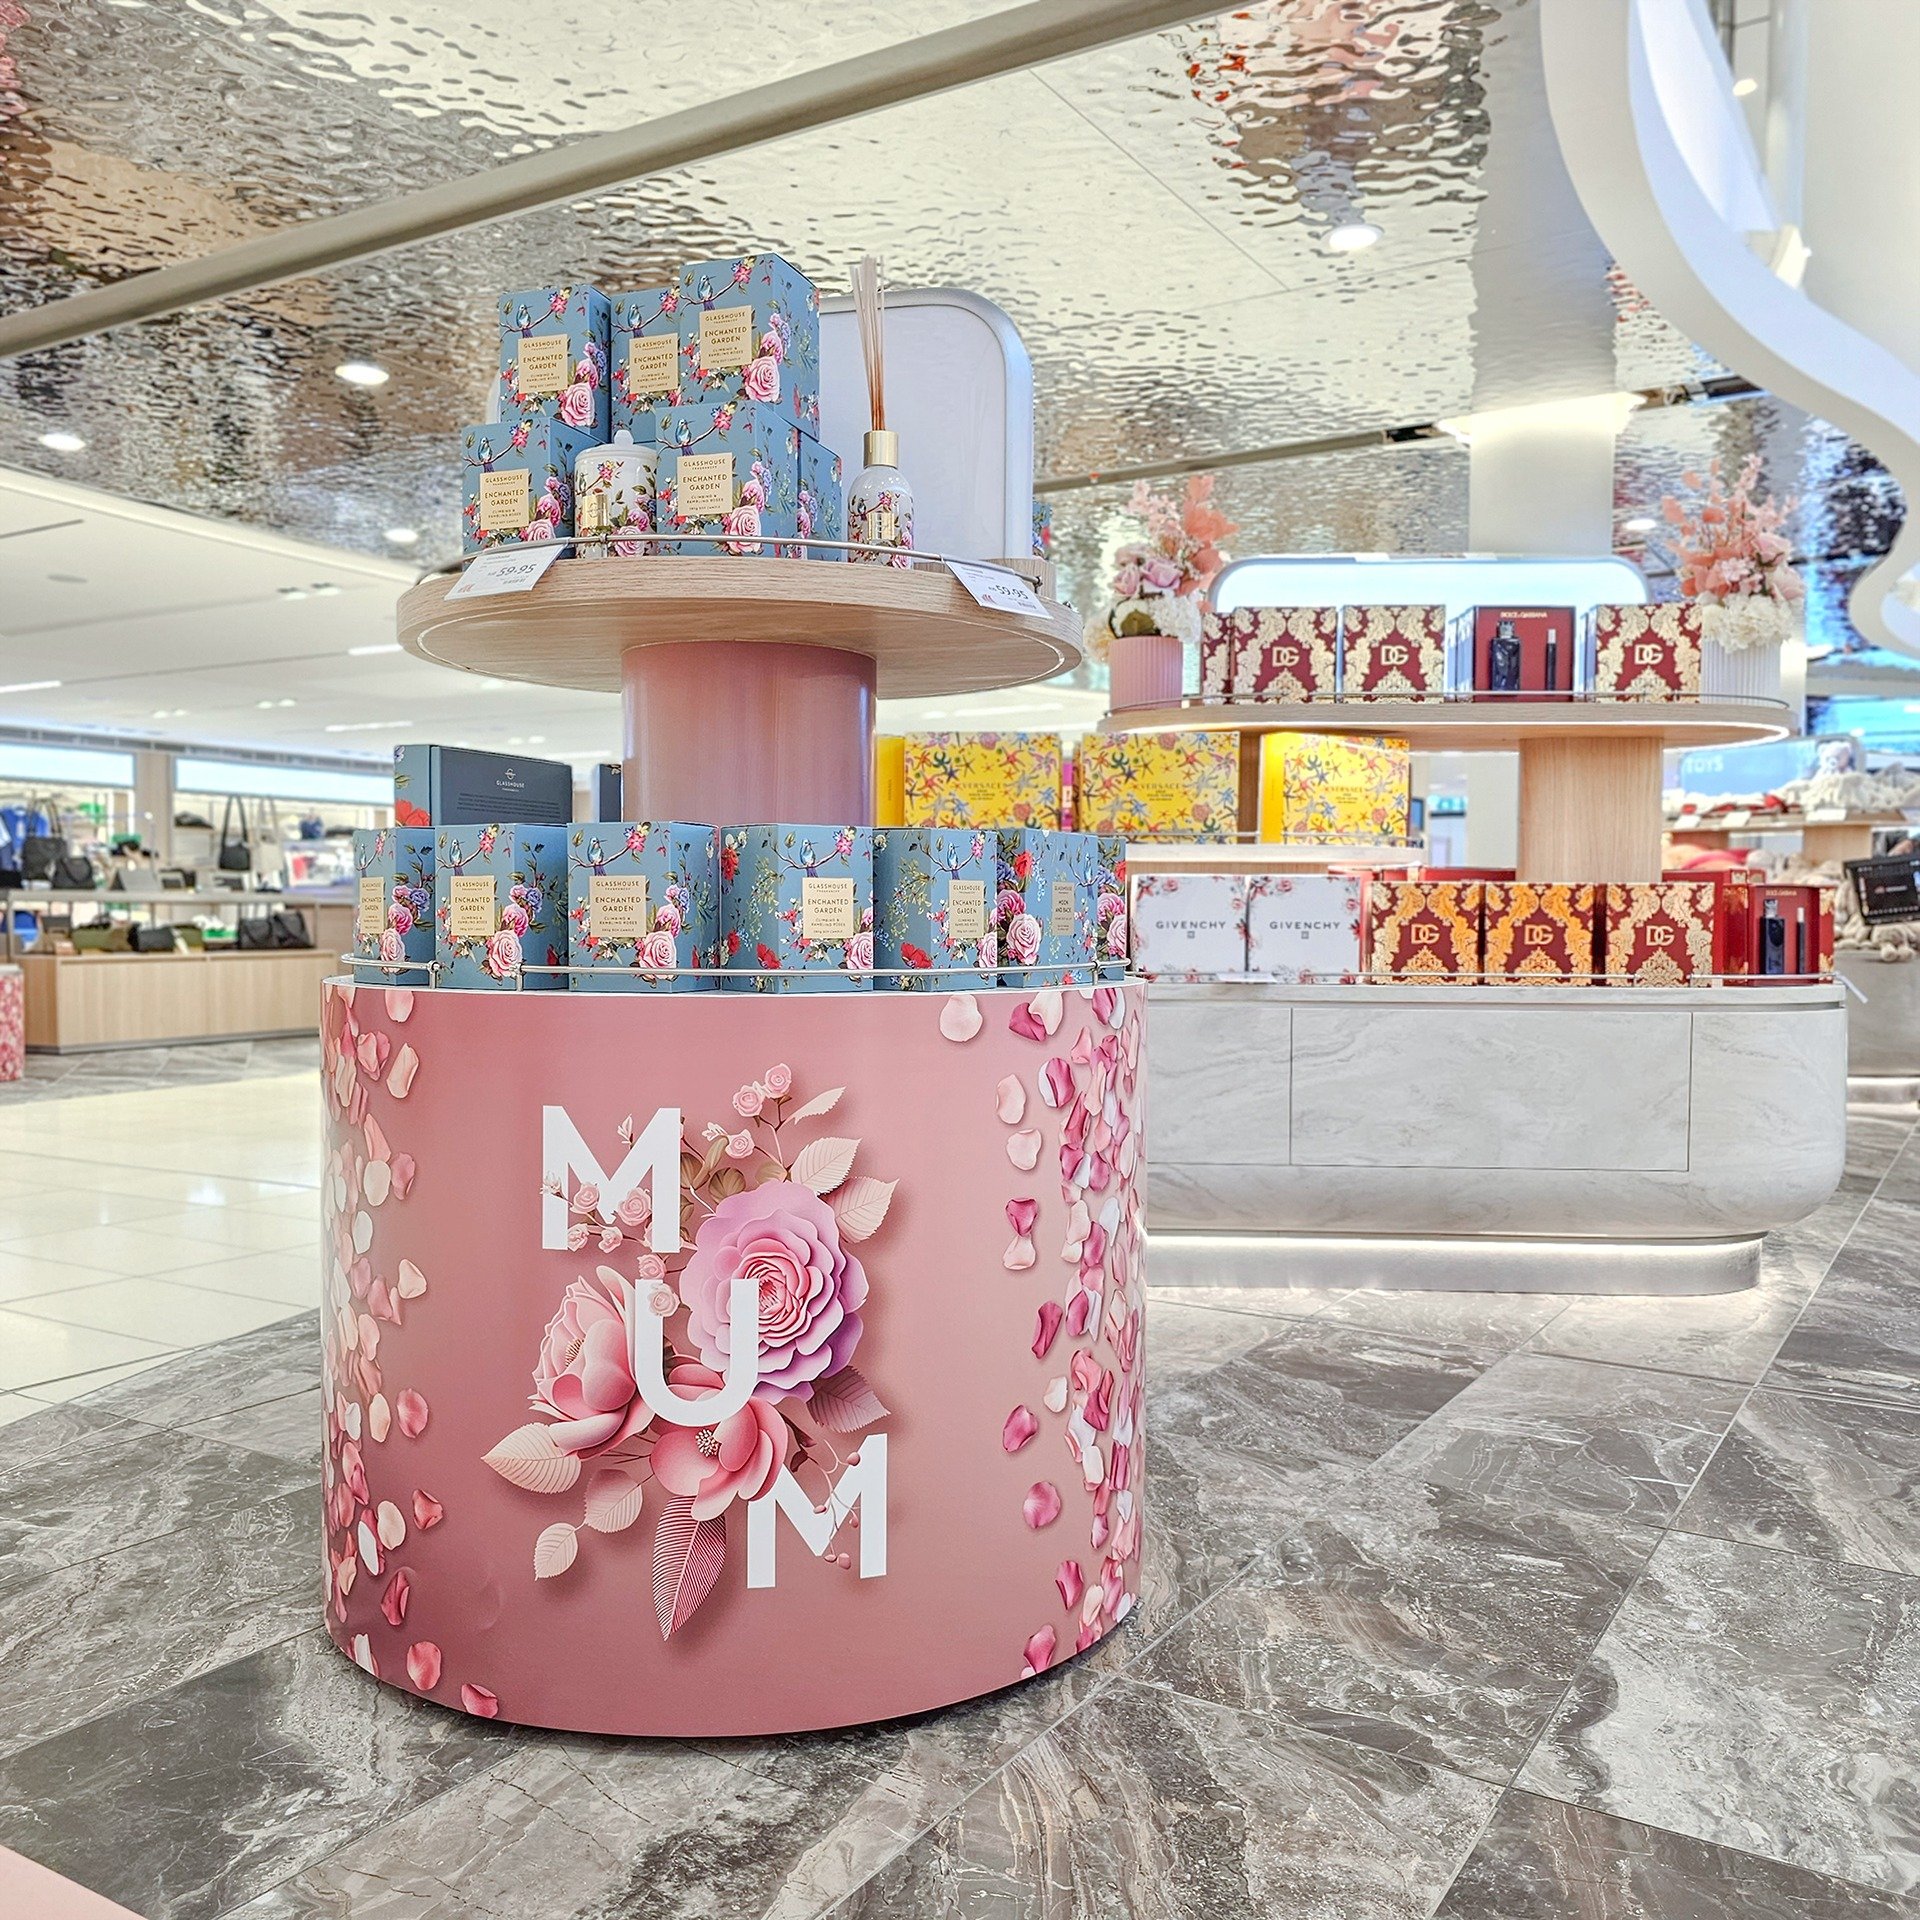 It&rsquo;s a wrap-up on #MothersDay with the #flowers scattered around the #ImpulsesDisplay we made for @heinemann_anz at #SydneyDomesticAirport T1 &amp; T2. 🌷🌹

Installation: @artandsoul.com.au
Spatial design &amp; Fabrication: @artandsoul.com.au
